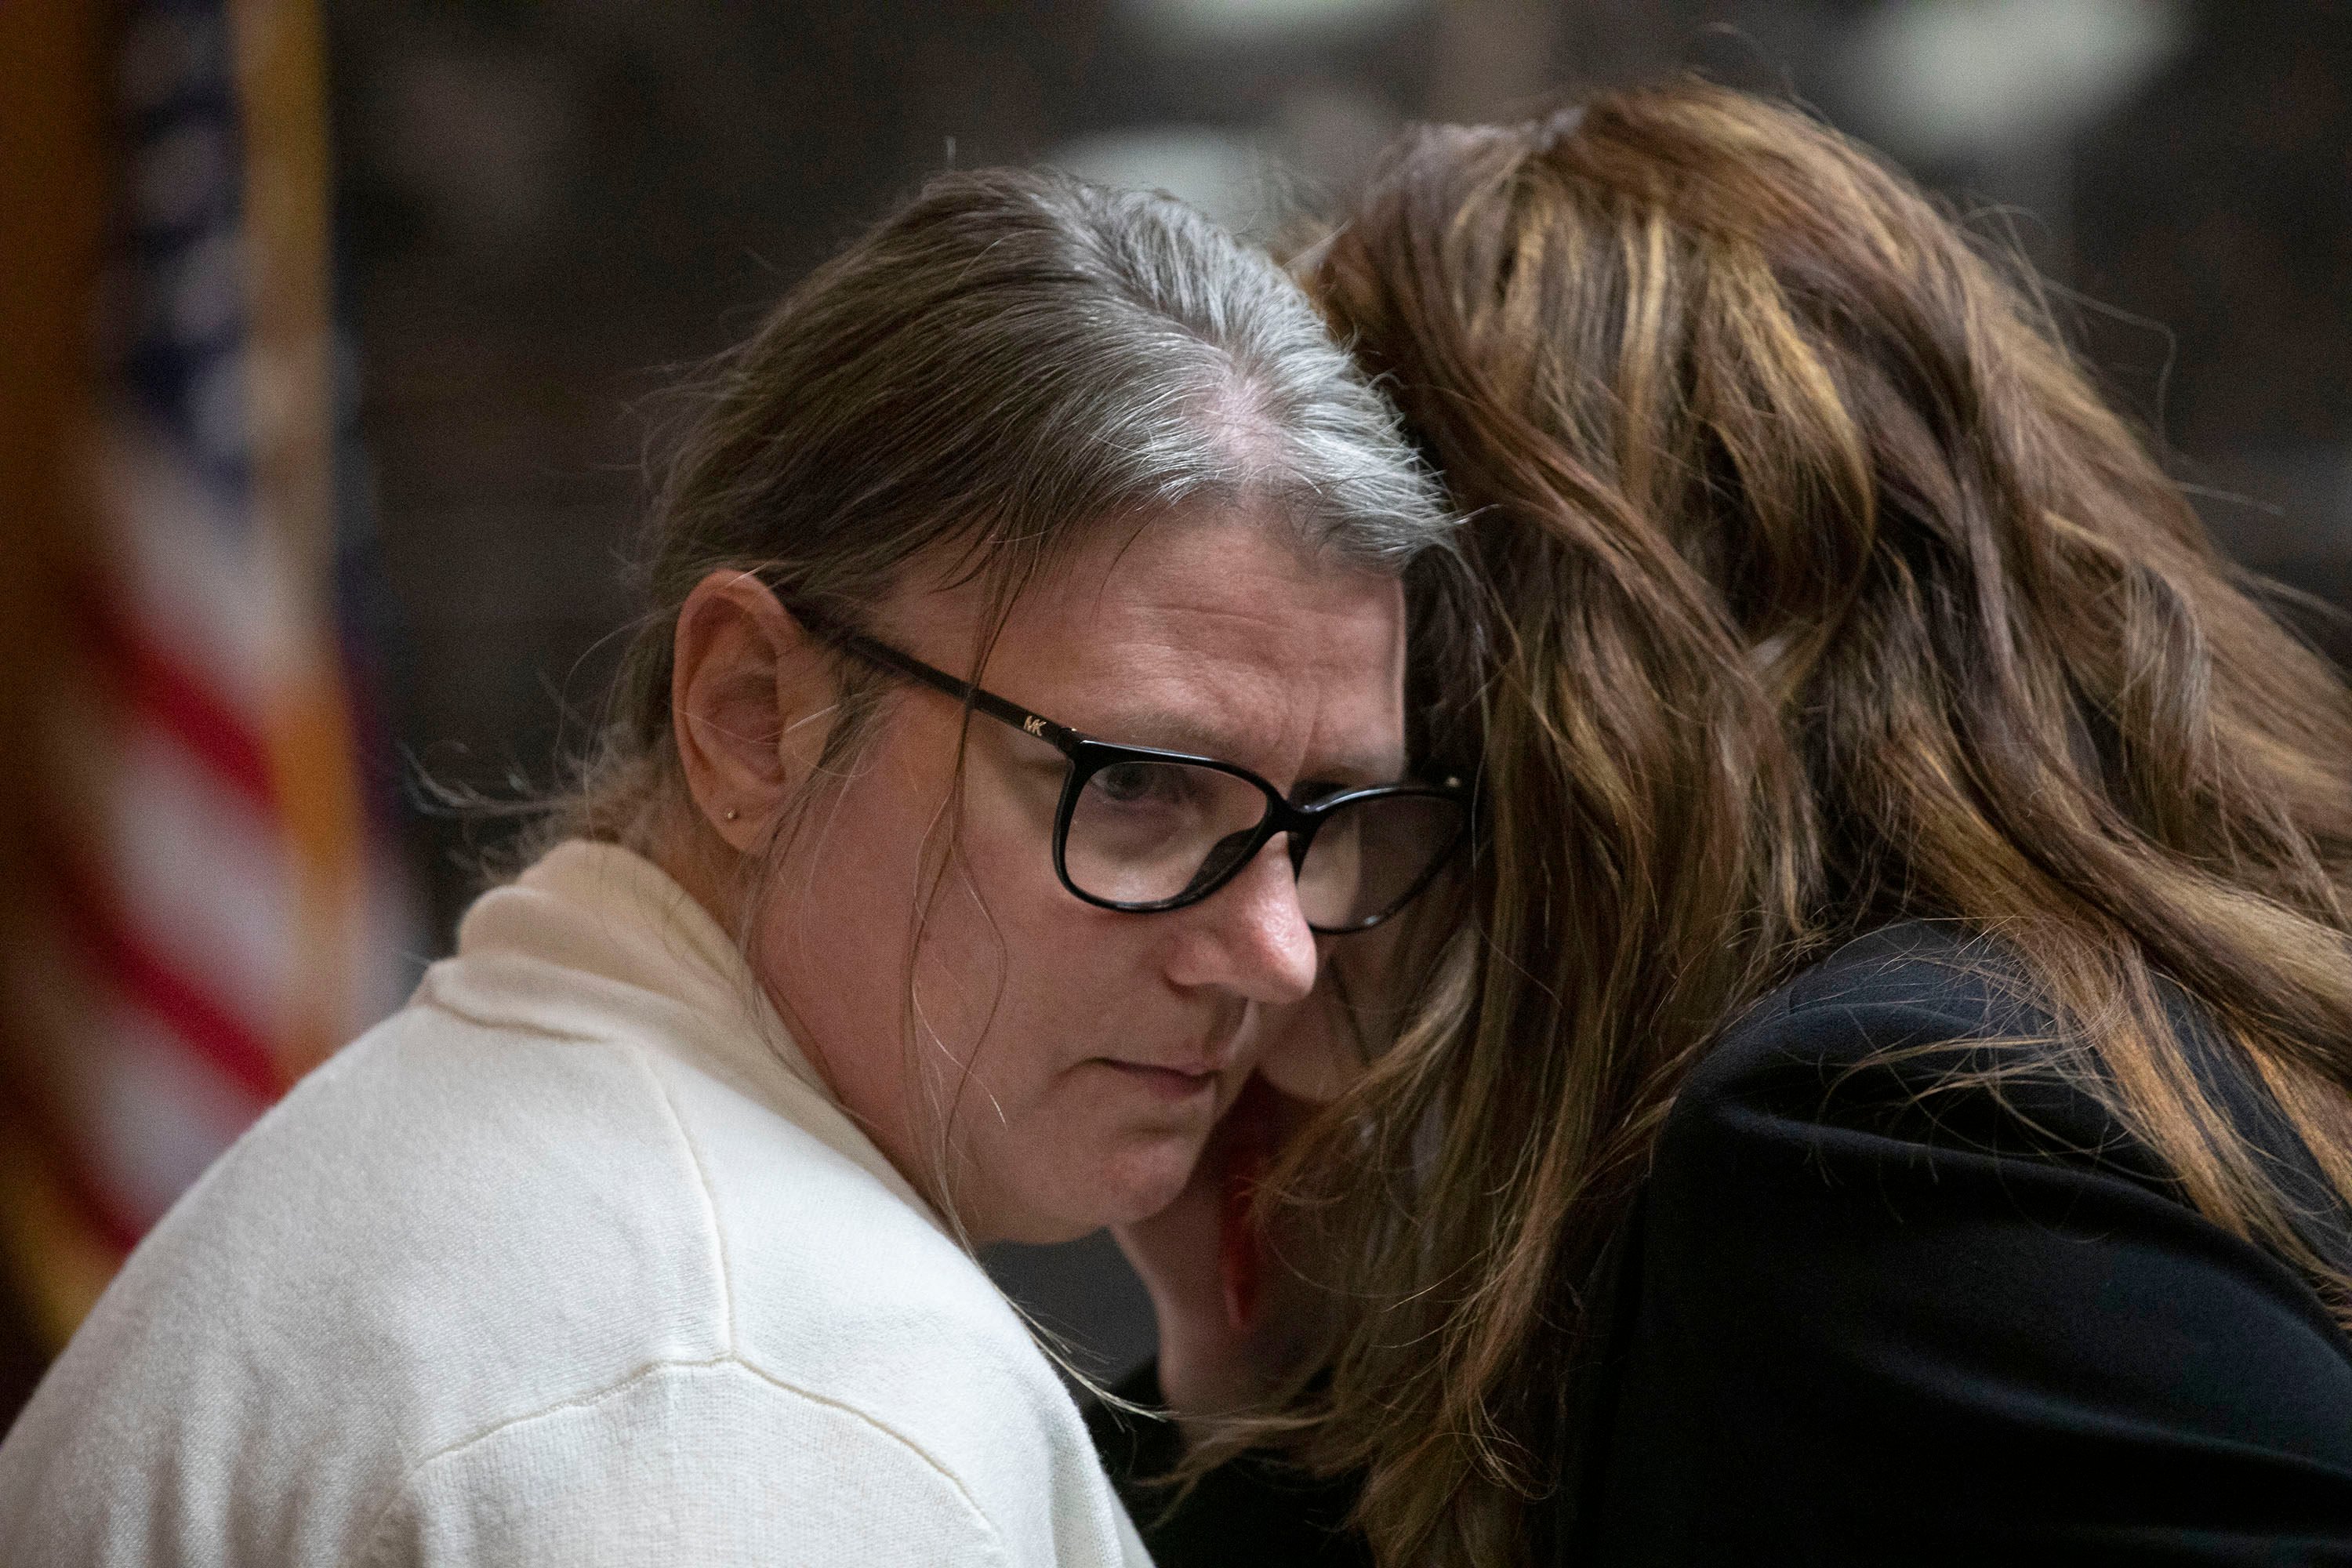  Jennifer Crumbley, the mother of Oxford school shooter Ethan Crumbley, speaks with her lawyer, Shannon Smith, in Oakland County Circuit Court on Tuesday. Photo: AFP